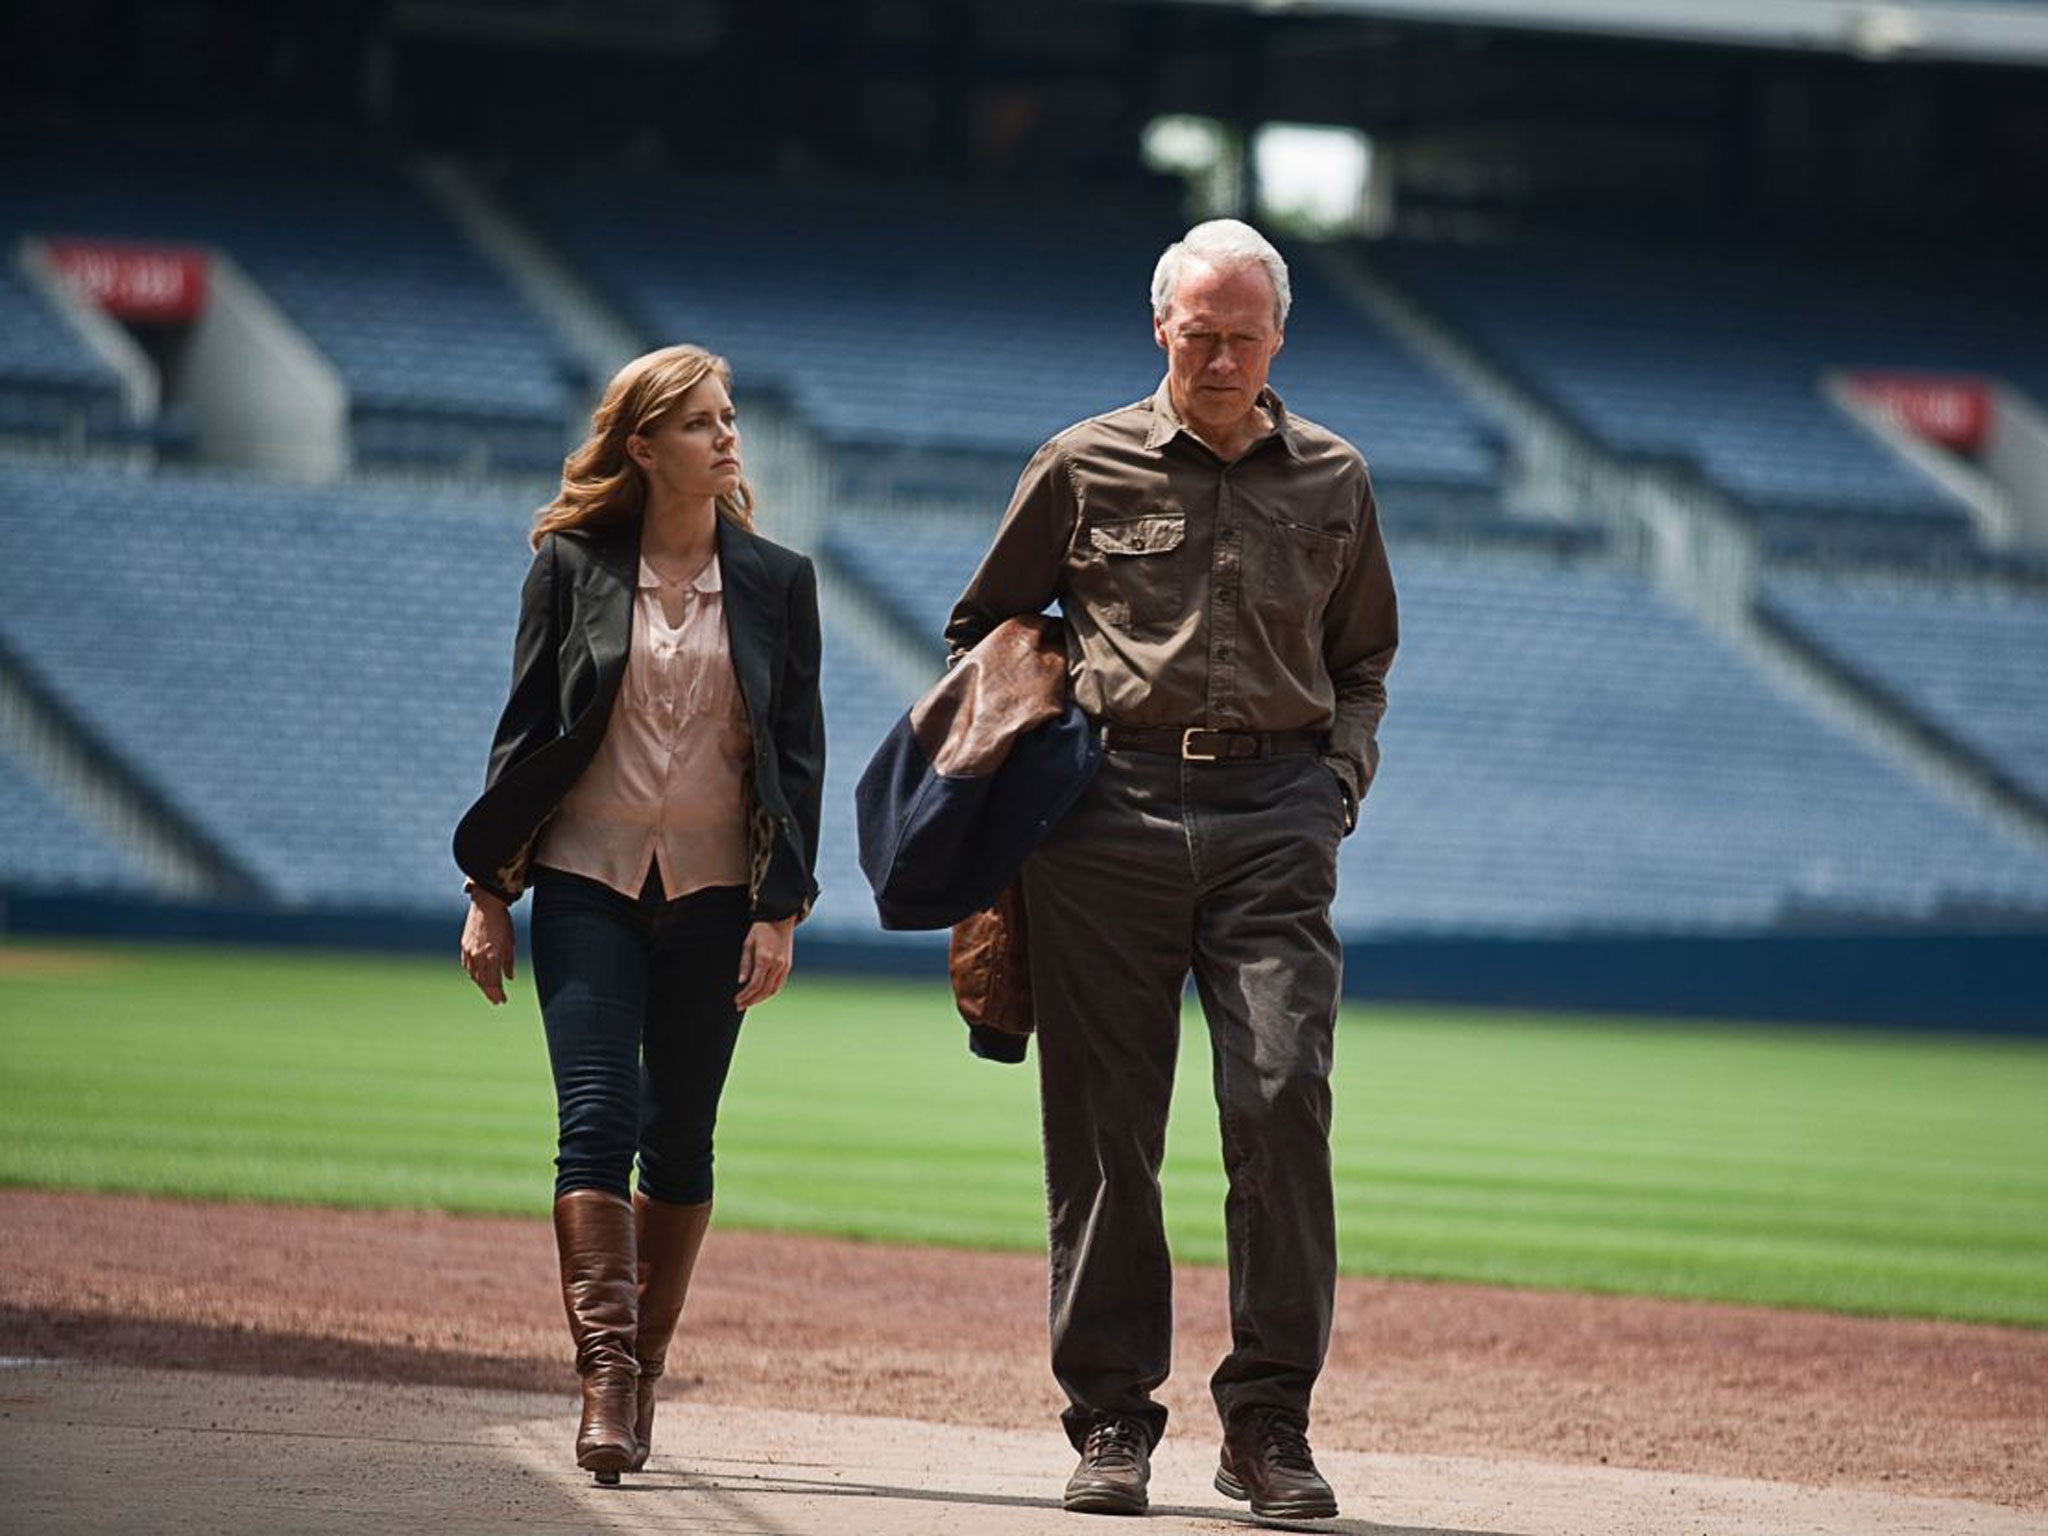 Getting on: Amy Adams and Clint Eastwood in ‘Trouble with the Curve’